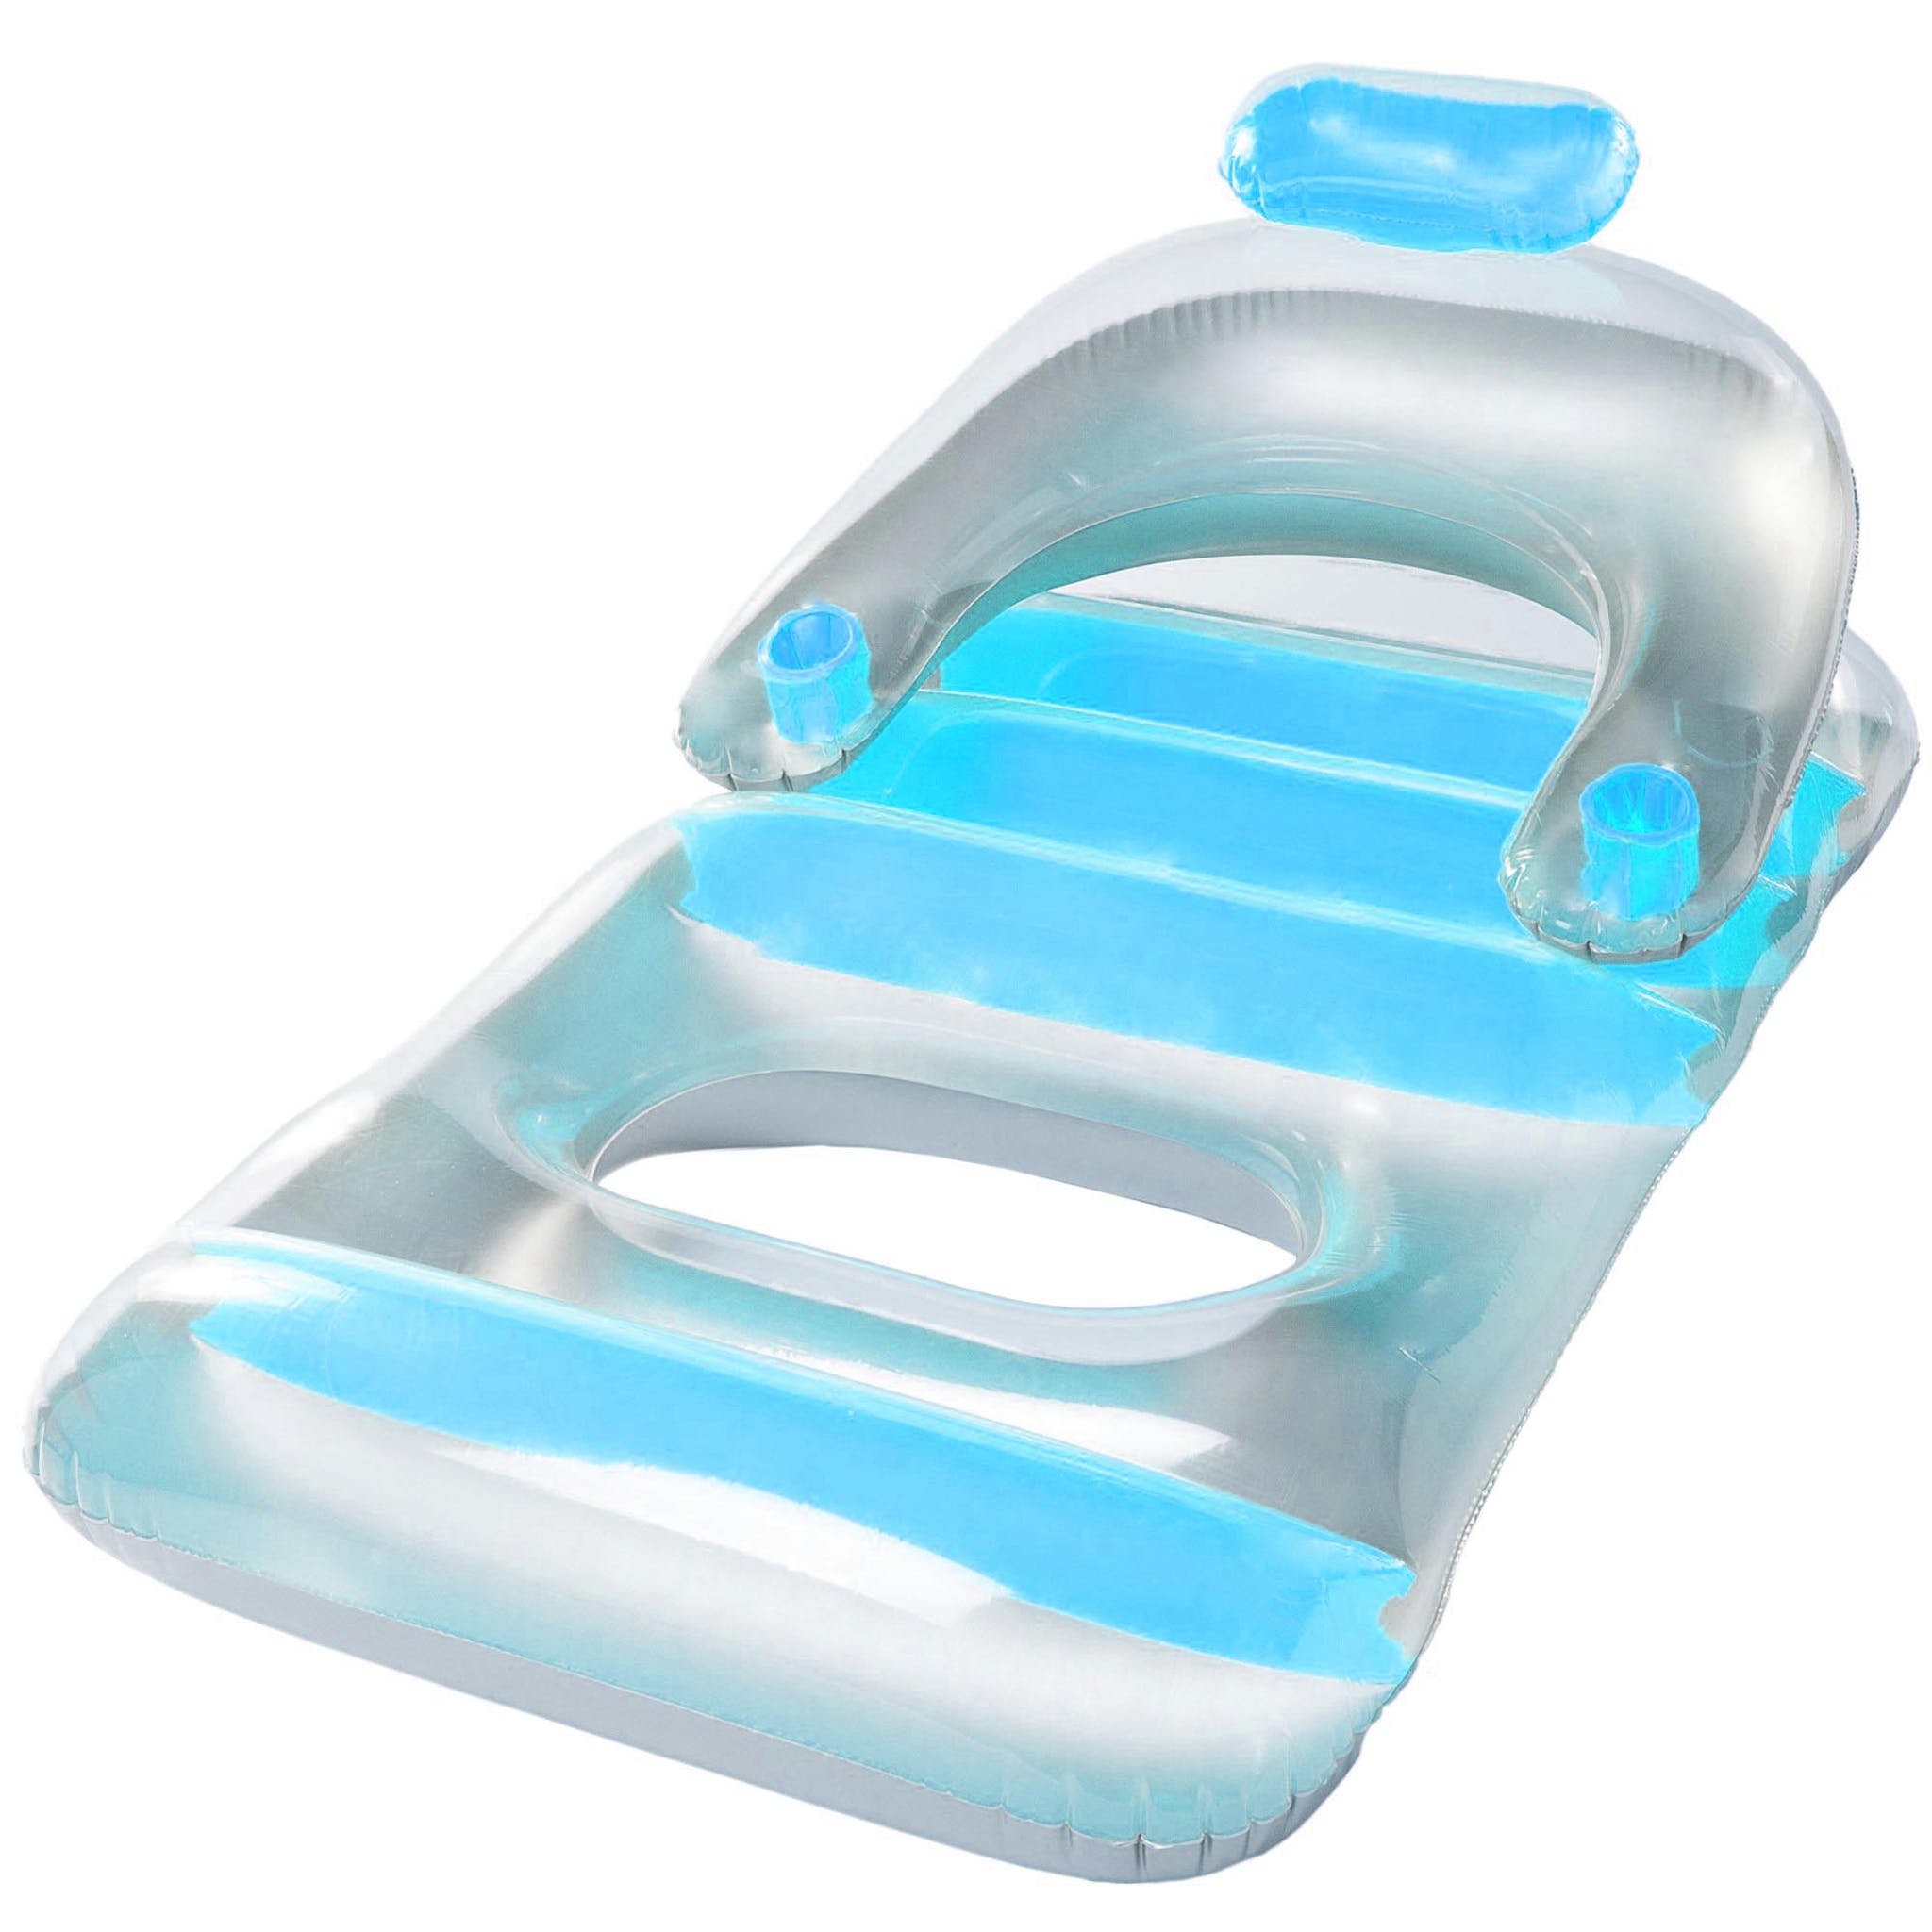 Blue Deluxe Inflatable Pool Lounge Chair | Pool Supplies Canada